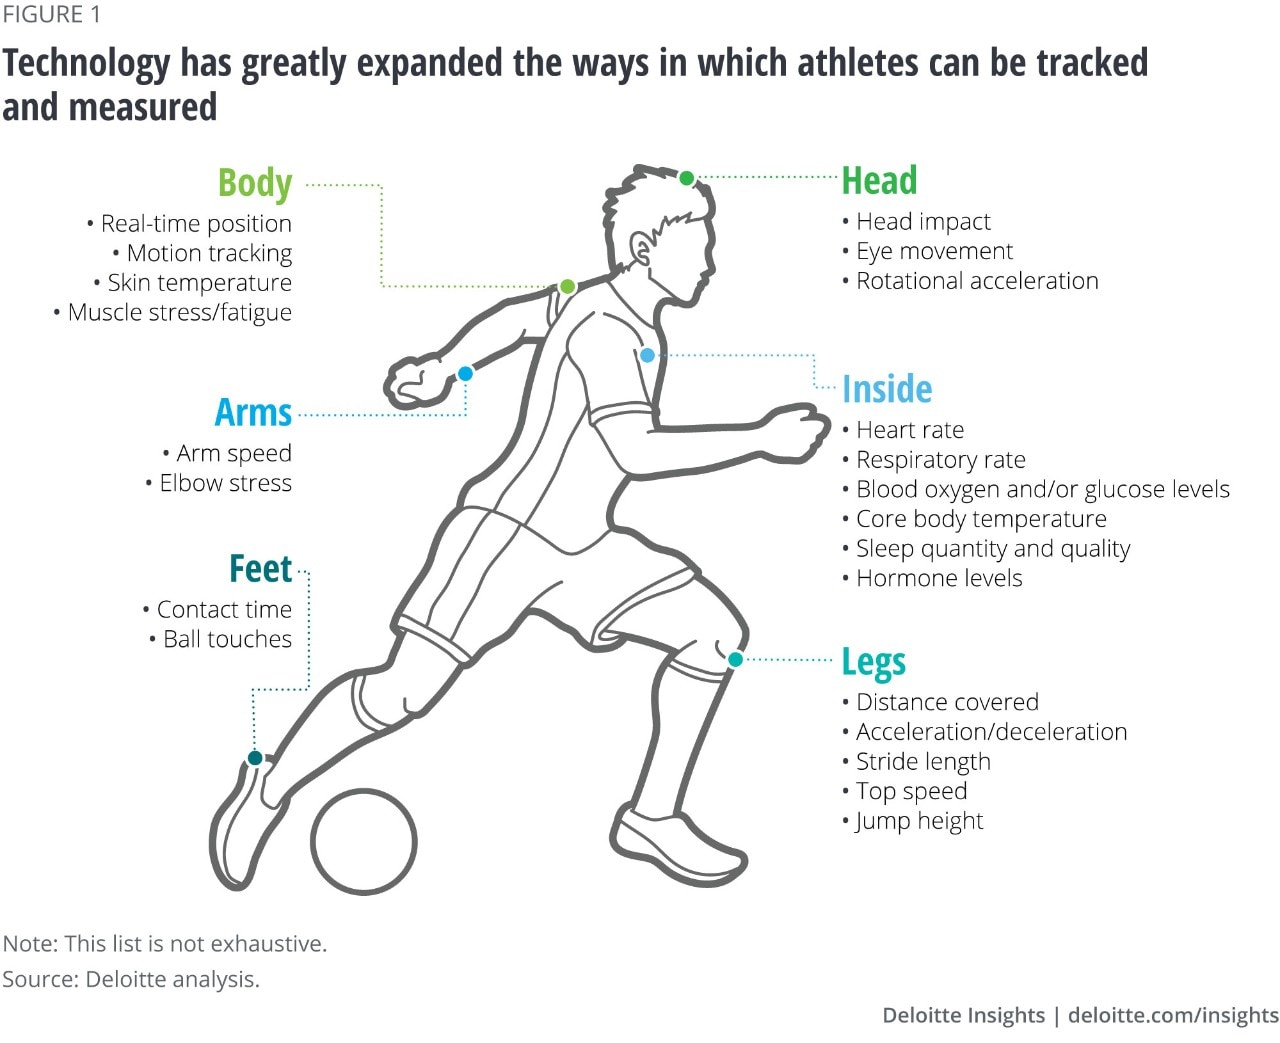 Technology has greatly expanded the ways in which athletes can be tracked and measured[bold-start] [bold-end]